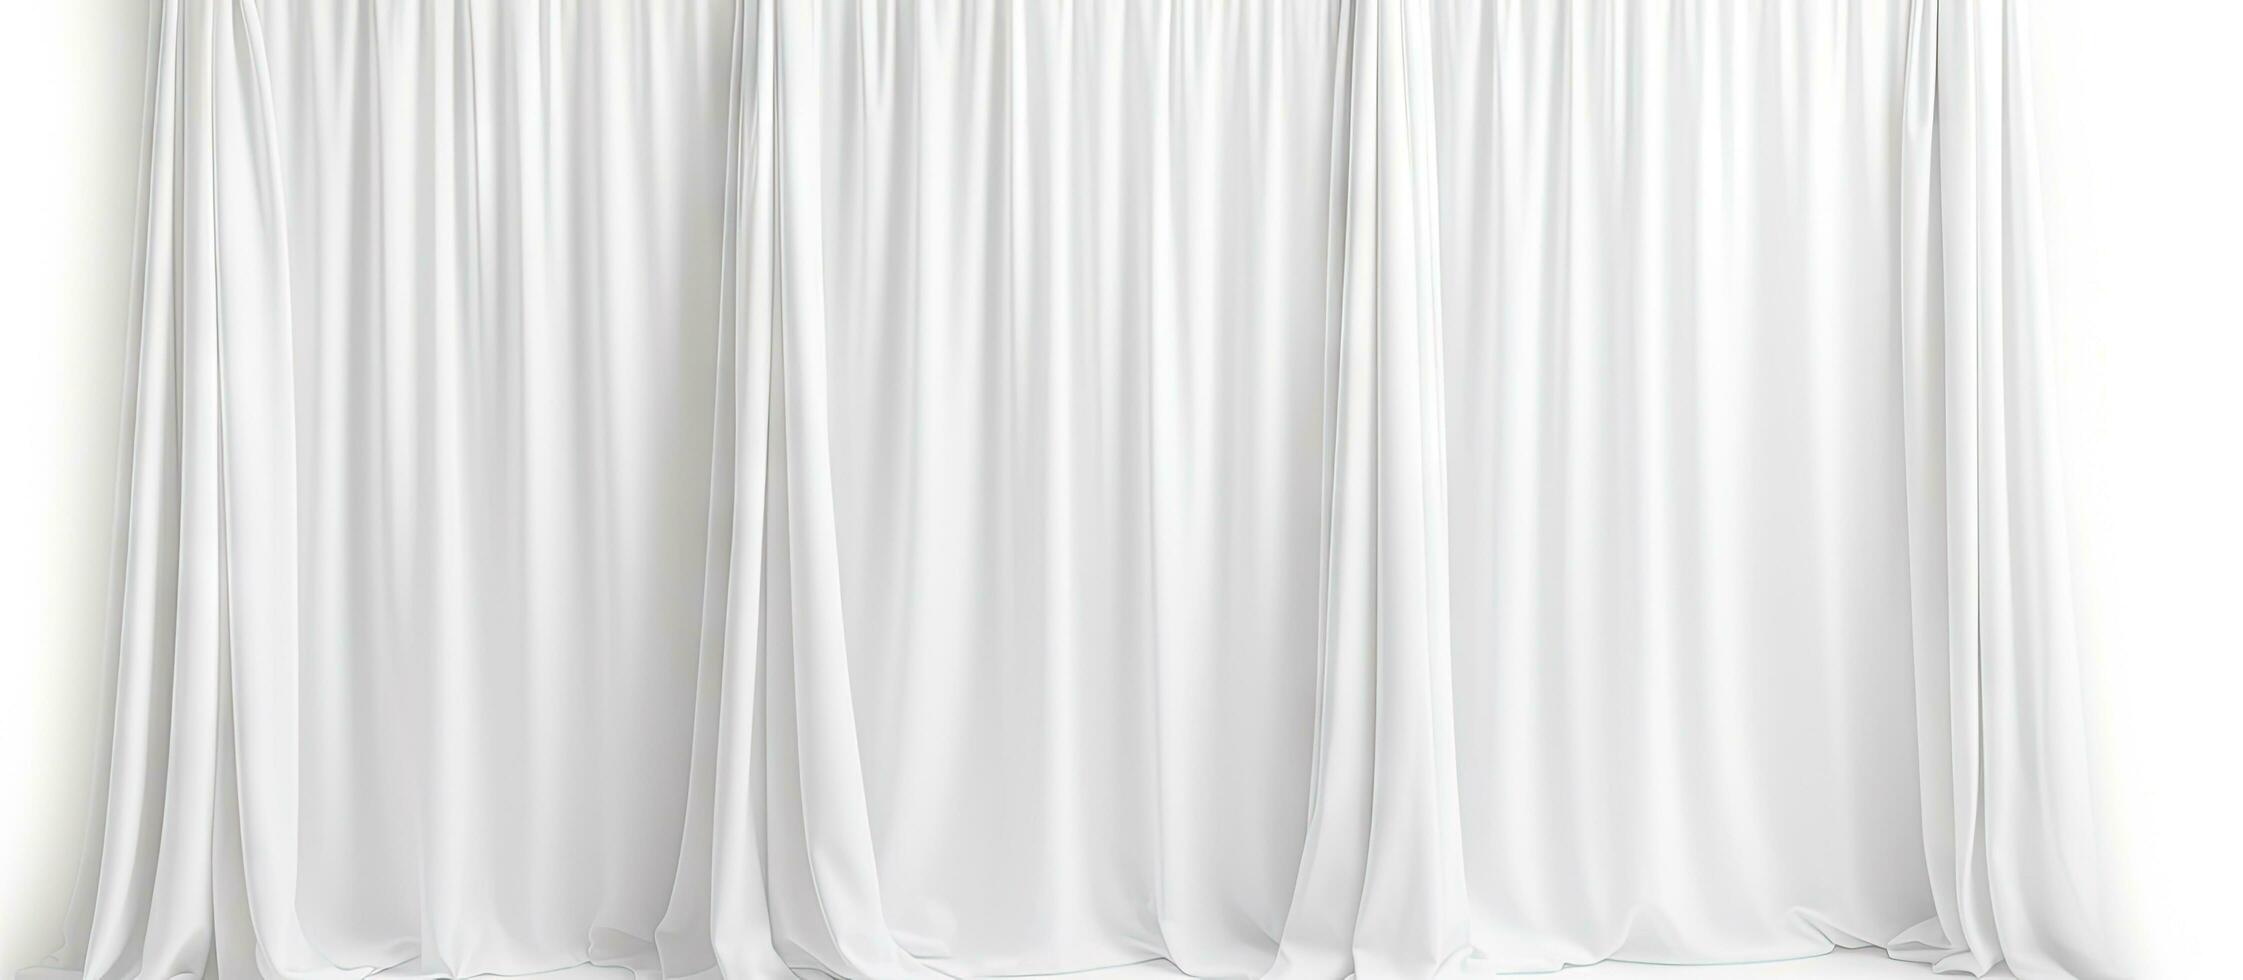 ed isolated white curtains with clipping path on white backdrop photo